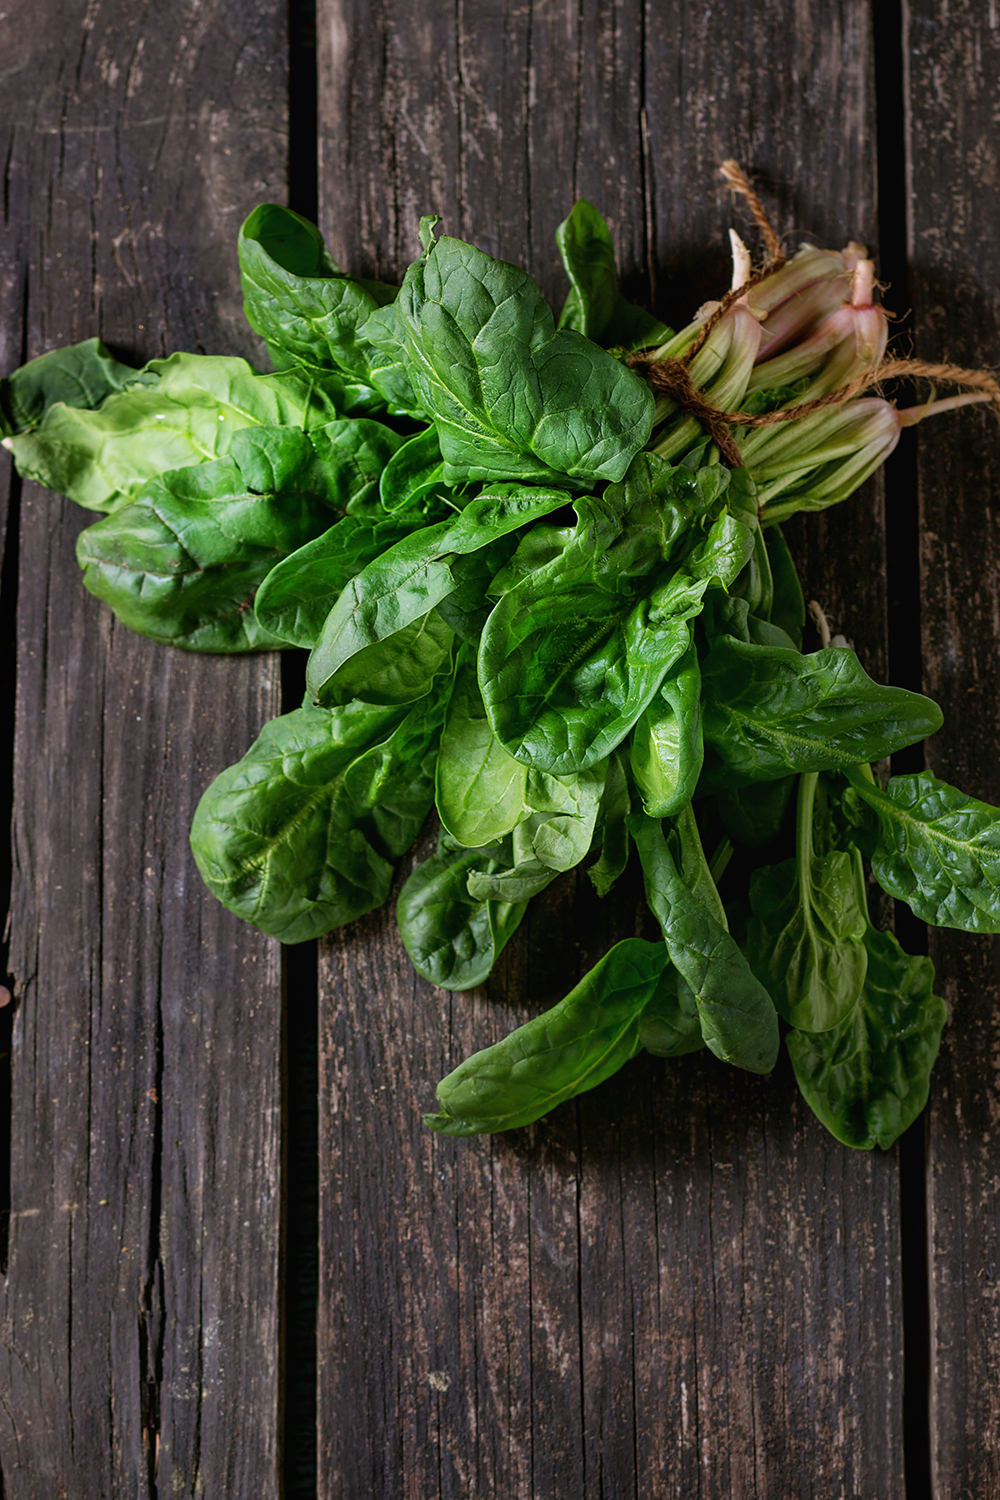 How To Cook Spinach: 5 Ways To Savor Its Simplicity - Learn How To Cook Spinach Perfectly Every Time: 5 Ways To Savor Its Simplicity